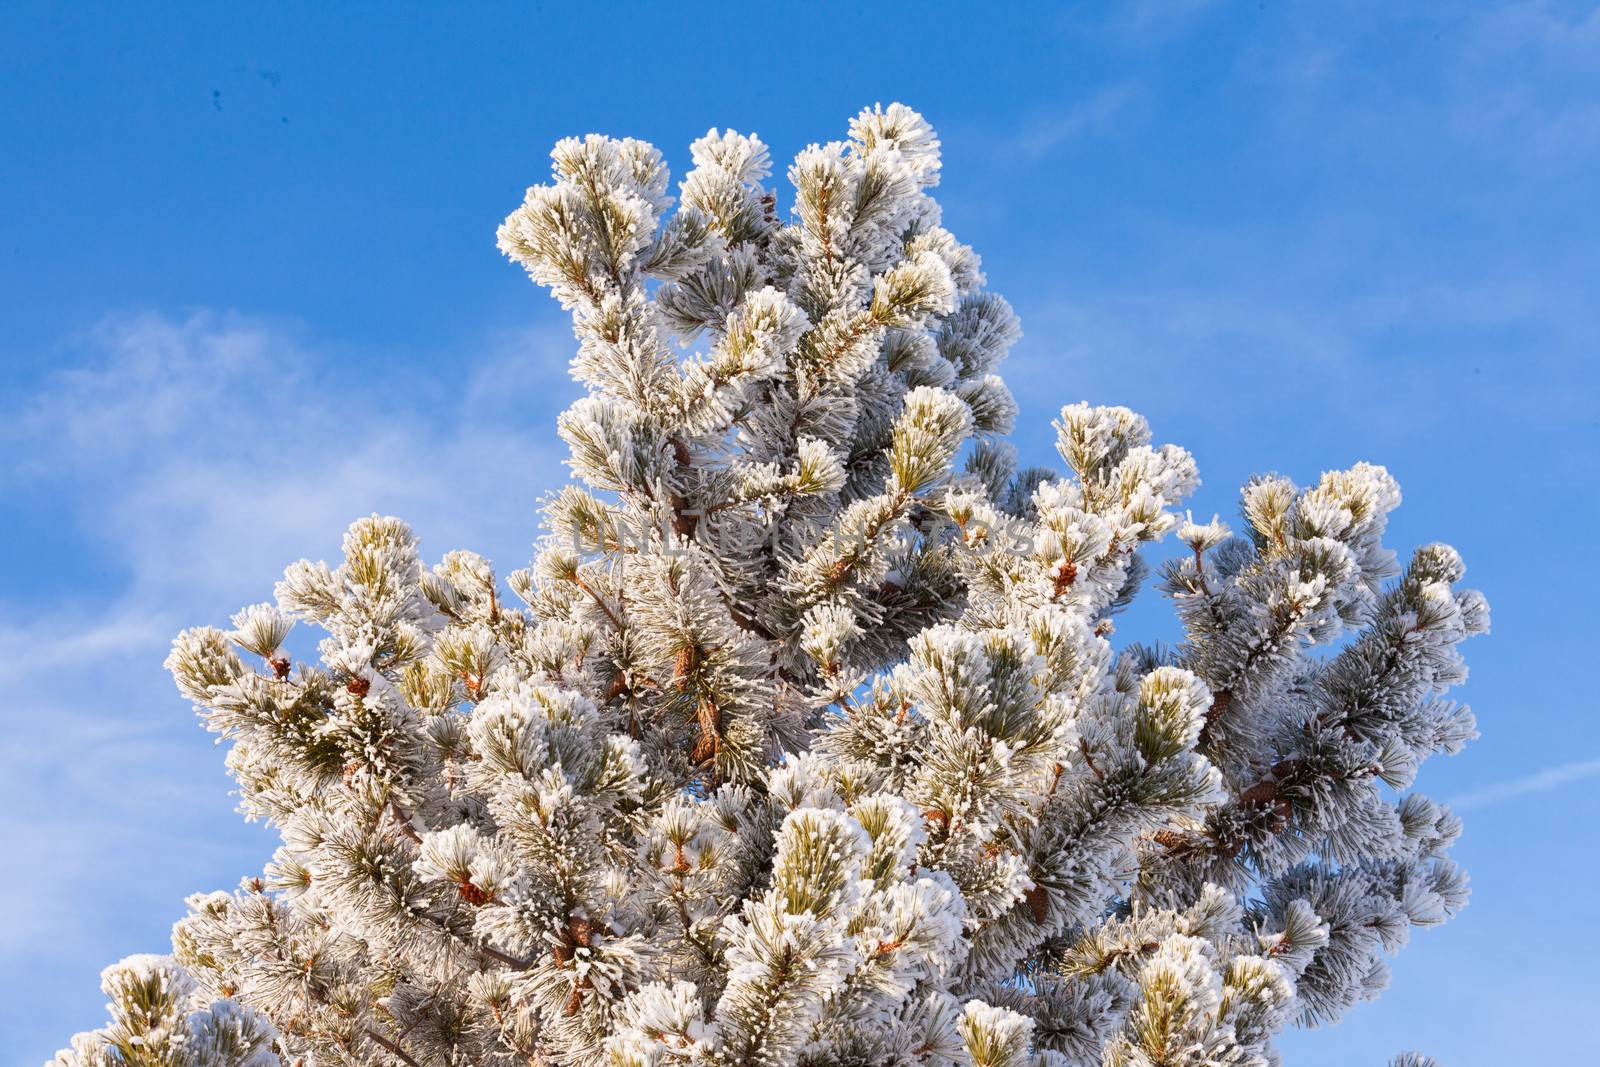 Winter pine tree covered in beautiful sparkling white hoar frost or snow built up and deposited during sub zero temperatures under clear blue sunny sky